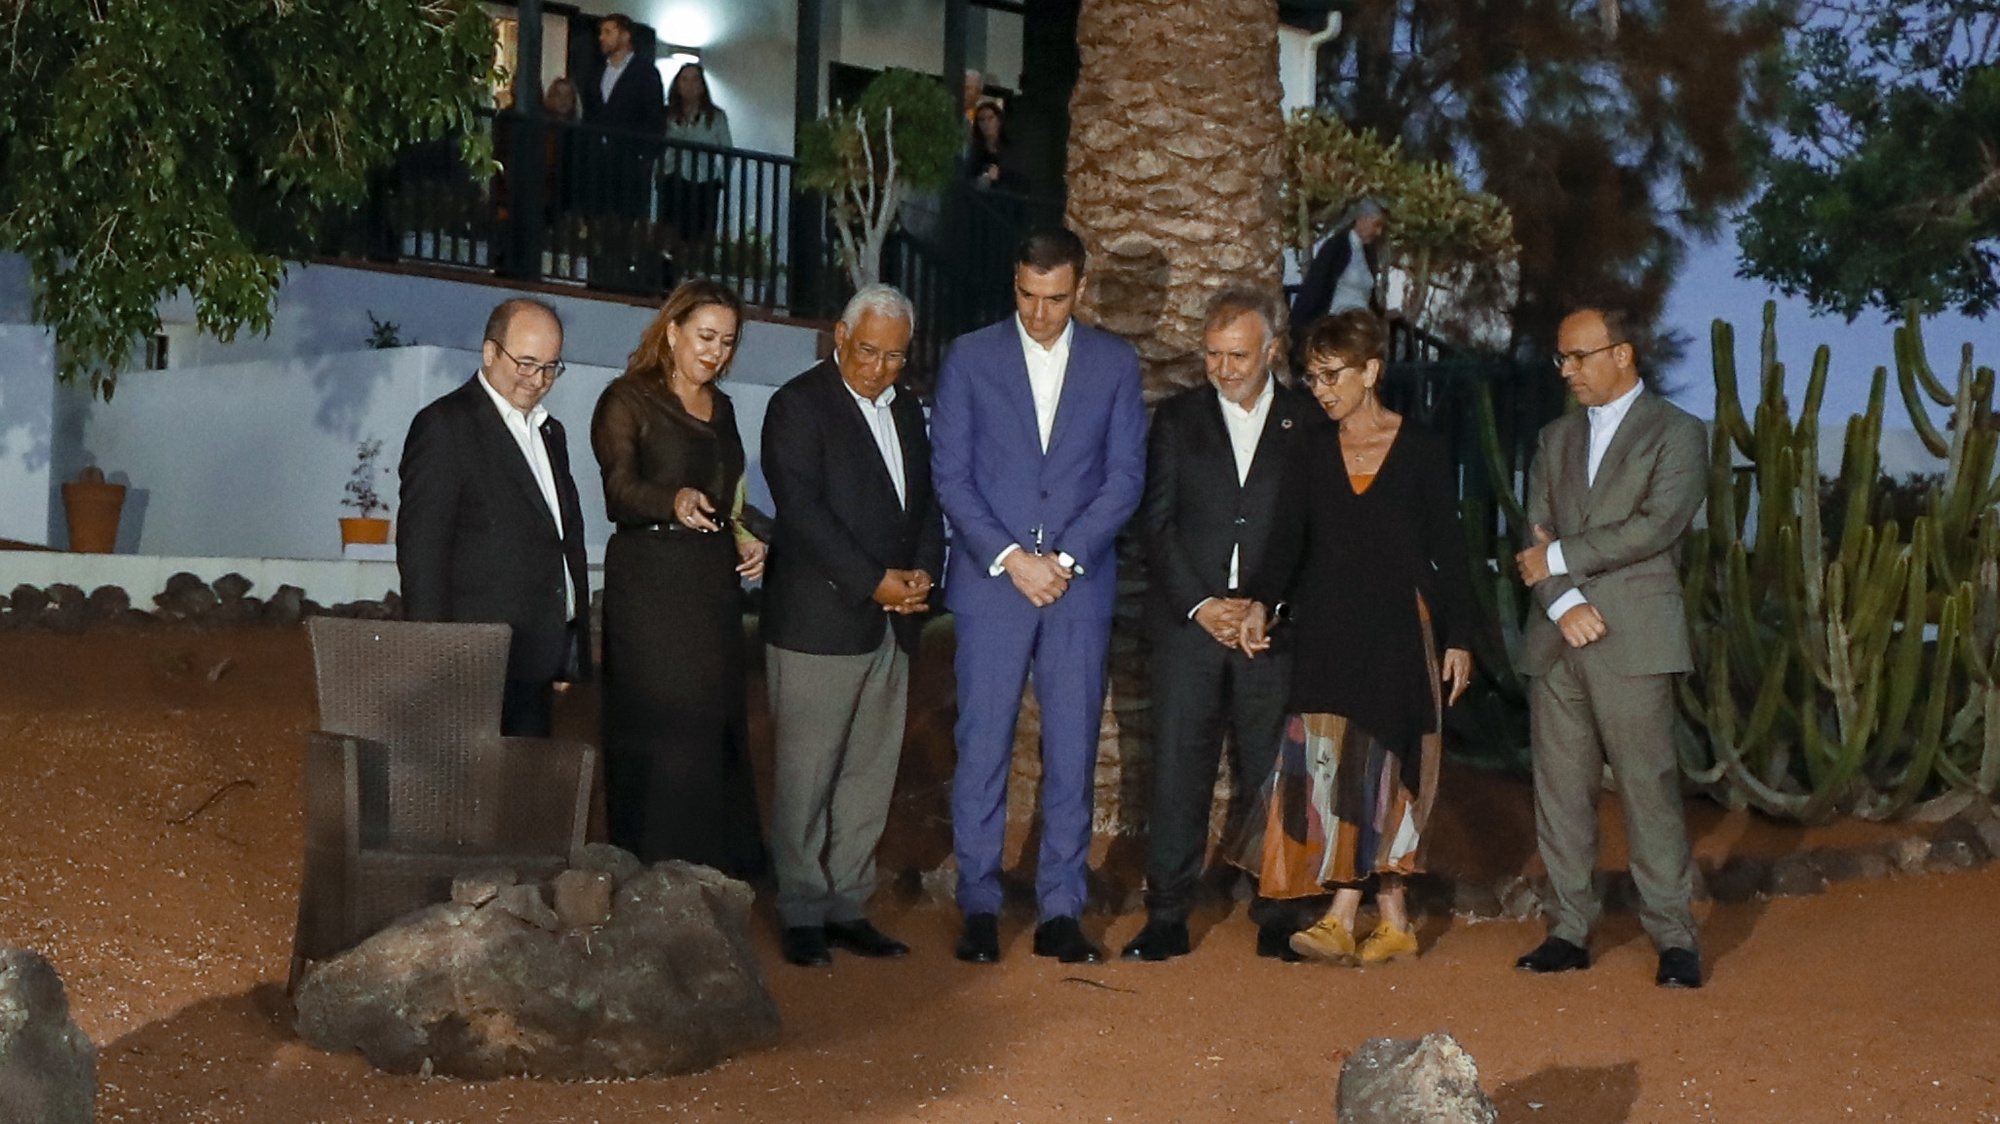 Spanish Primer Minister Pedro Sanchez (C) Portuguese counterpart Antonio Costa (3rd L) ,Portuguese Culture Minister Pedro Adao e Silva (R) and Pilar del Río (2R) during their visit to Jose Saramago Museum, as they honor the late Portuguese writer during the centenary of his birth, in Tias, Lanzarote, Canary Islands, Spain, 14 March 2023. Costa is in Spain to attend the Spanish-Portuguese summit to be held in Lanzarote island on 15 March 2023.  EPA/Elvira Urquijo